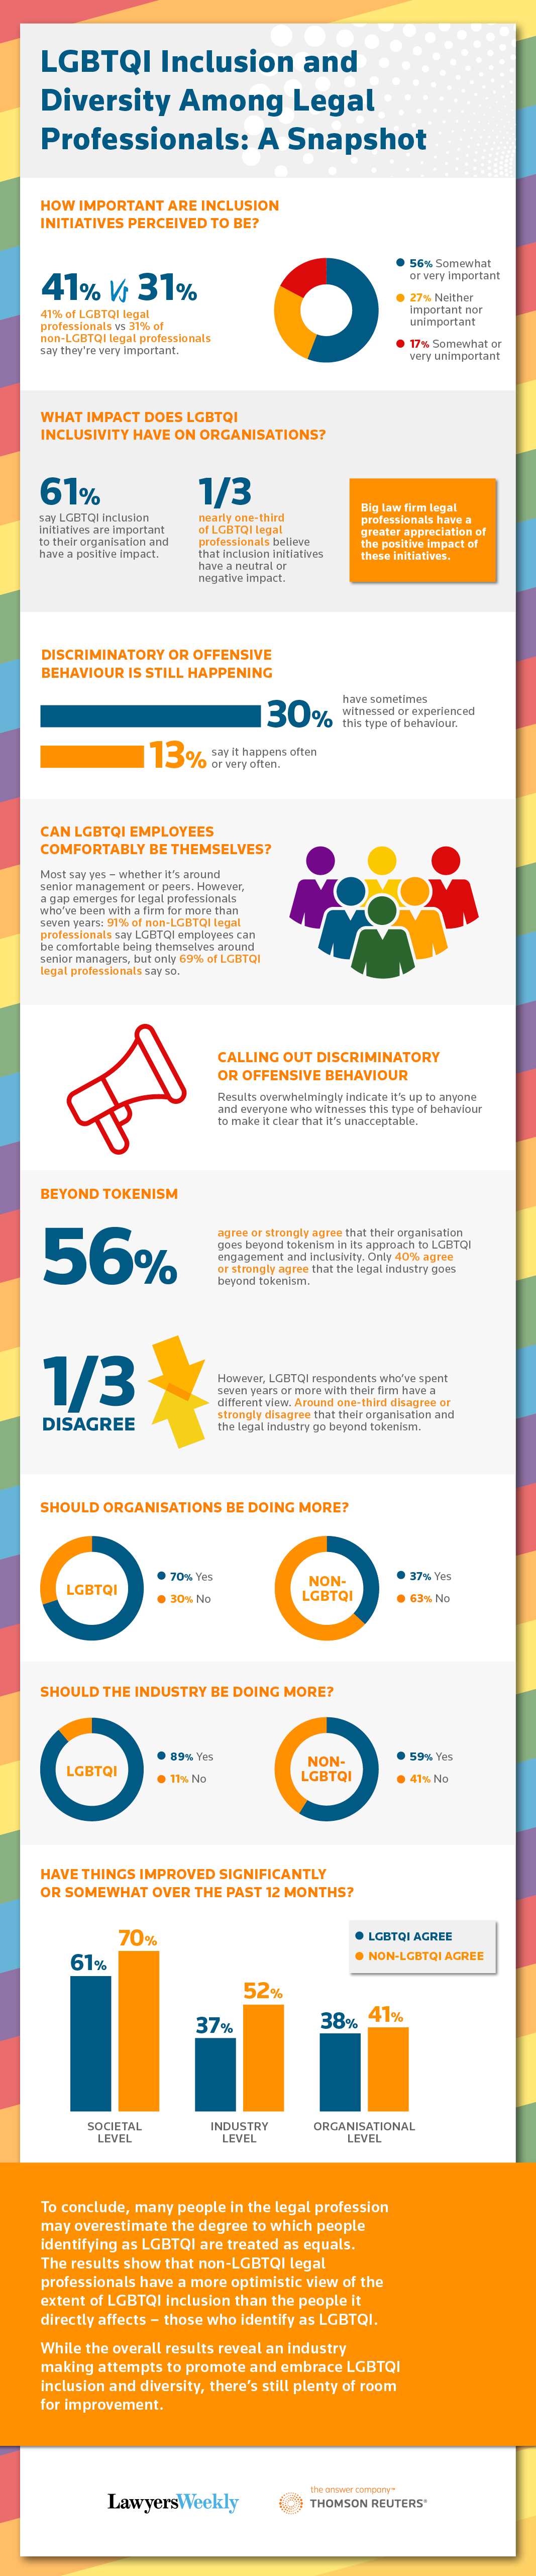 LGBTQI Inclusion and Diversity Among Legal Professionals: A Snapshot [Infographic]